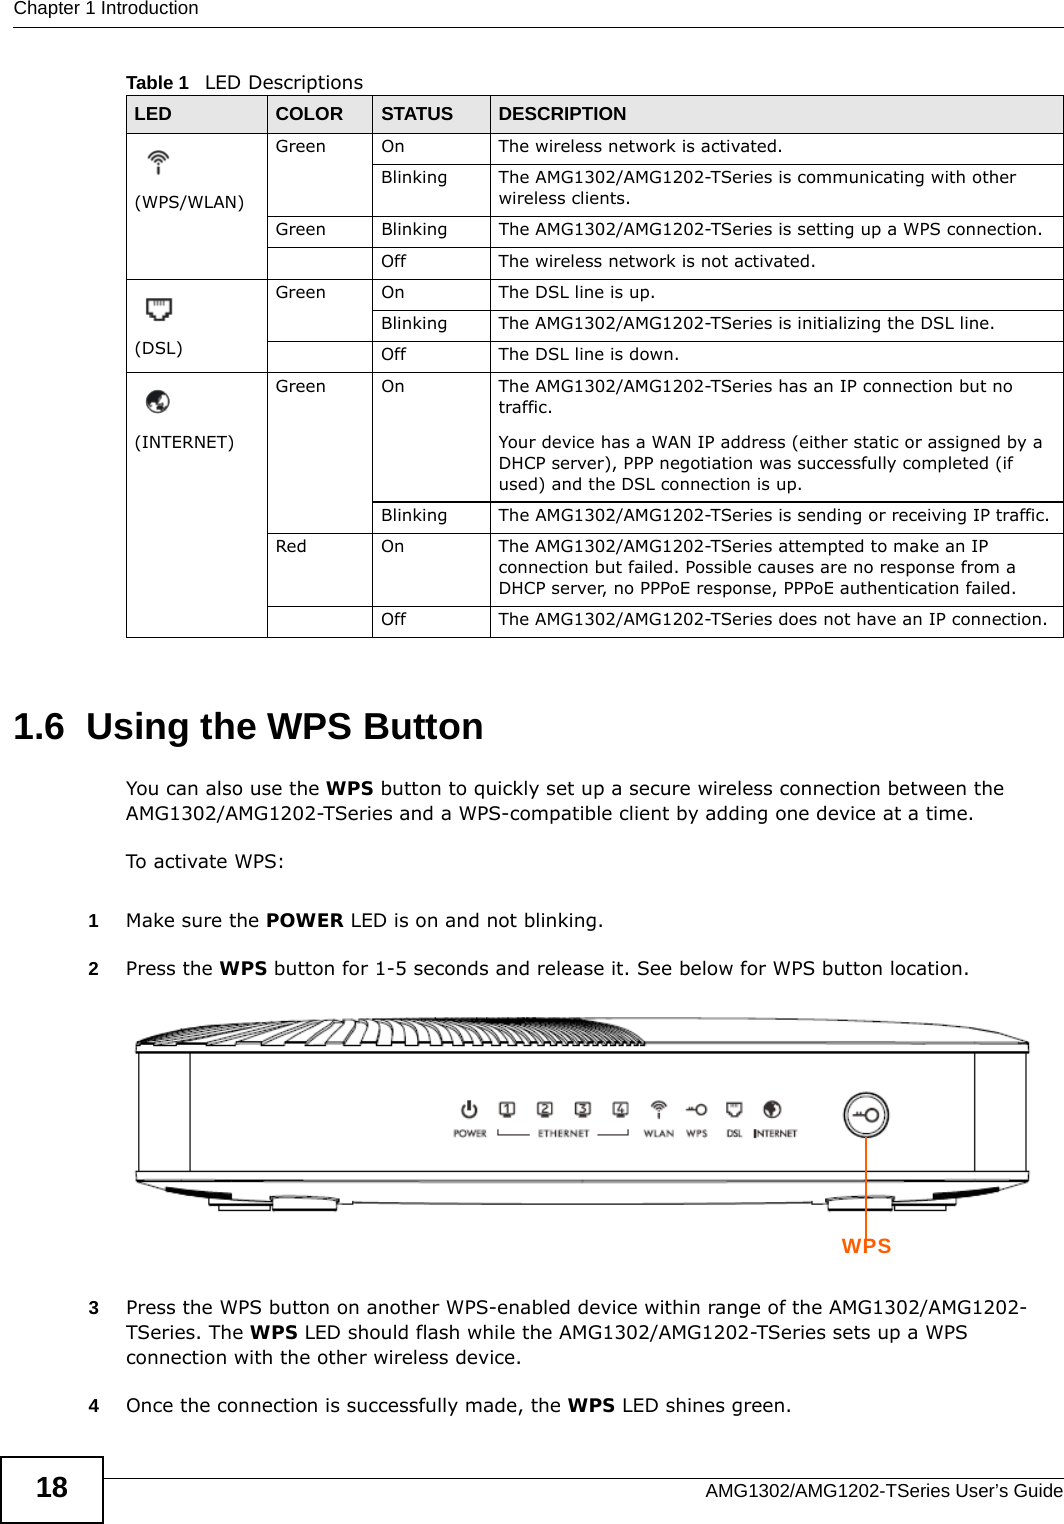 Chapter 1 IntroductionAMG1302/AMG1202-TSeries User’s Guide181.6  Using the WPS ButtonYou can also use the WPS button to quickly set up a secure wireless connection between theAMG1302/AMG1202-TSeries and a WPS-compatible client by adding one device at a time.To activate WPS:1Make sure the POWER LED is on and not blinking.2Press the WPS button for 1-5 seconds and release it. See below for WPS button location. 3Press the WPS button on another WPS-enabled device within range of the AMG1302/AMG1202-TSeries. The WPS LED should flash while the AMG1302/AMG1202-TSeries sets up a WPS connection with the other wireless device. 4Once the connection is successfully made, the WPS LED shines green.(WPS/WLAN)Green On The wireless network is activated.Blinking The AMG1302/AMG1202-TSeries is communicating with other wireless clients.Green Blinking The AMG1302/AMG1202-TSeries is setting up a WPS connection.Off The wireless network is not activated.(DSL)Green On The DSL line is up.Blinking The AMG1302/AMG1202-TSeries is initializing the DSL line.Off The DSL line is down.(INTERNET)Green On The AMG1302/AMG1202-TSeries has an IP connection but no traffic.Your device has a WAN IP address (either static or assigned by a DHCP server), PPP negotiation was successfully completed (if used) and the DSL connection is up.Blinking The AMG1302/AMG1202-TSeries is sending or receiving IP traffic.Red On The AMG1302/AMG1202-TSeries attempted to make an IP connection but failed. Possible causes are no response from a DHCP server, no PPPoE response, PPPoE authentication failed.Off The AMG1302/AMG1202-TSeries does not have an IP connection.Table 1   LED DescriptionsLED COLOR STATUS DESCRIPTIONWPS